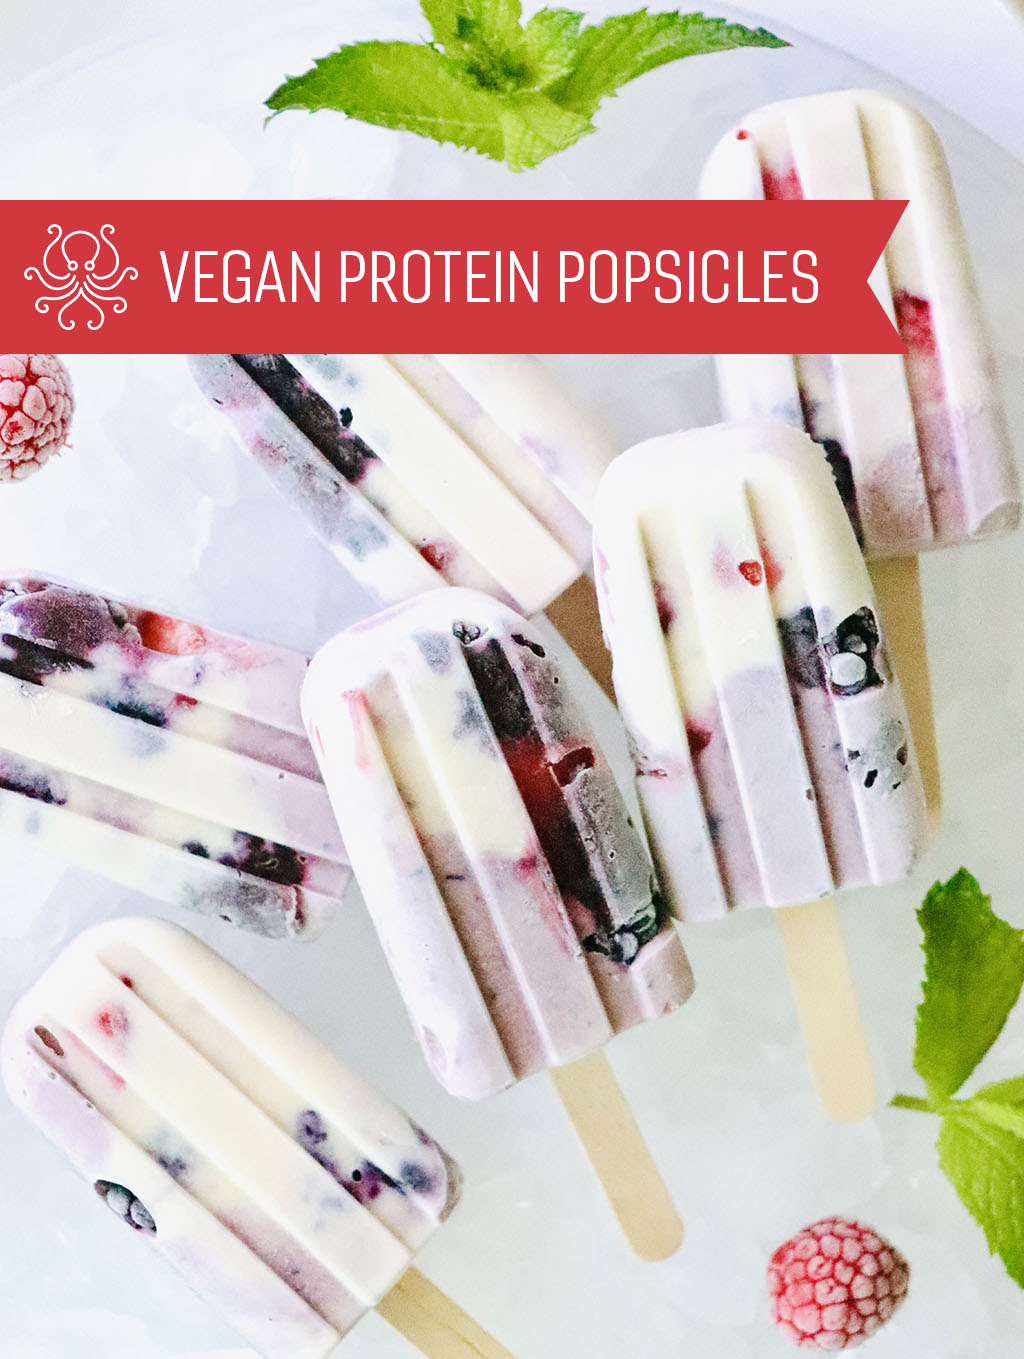 Vegan Protein Popsicles with Octonuts California Almond Protein Powder